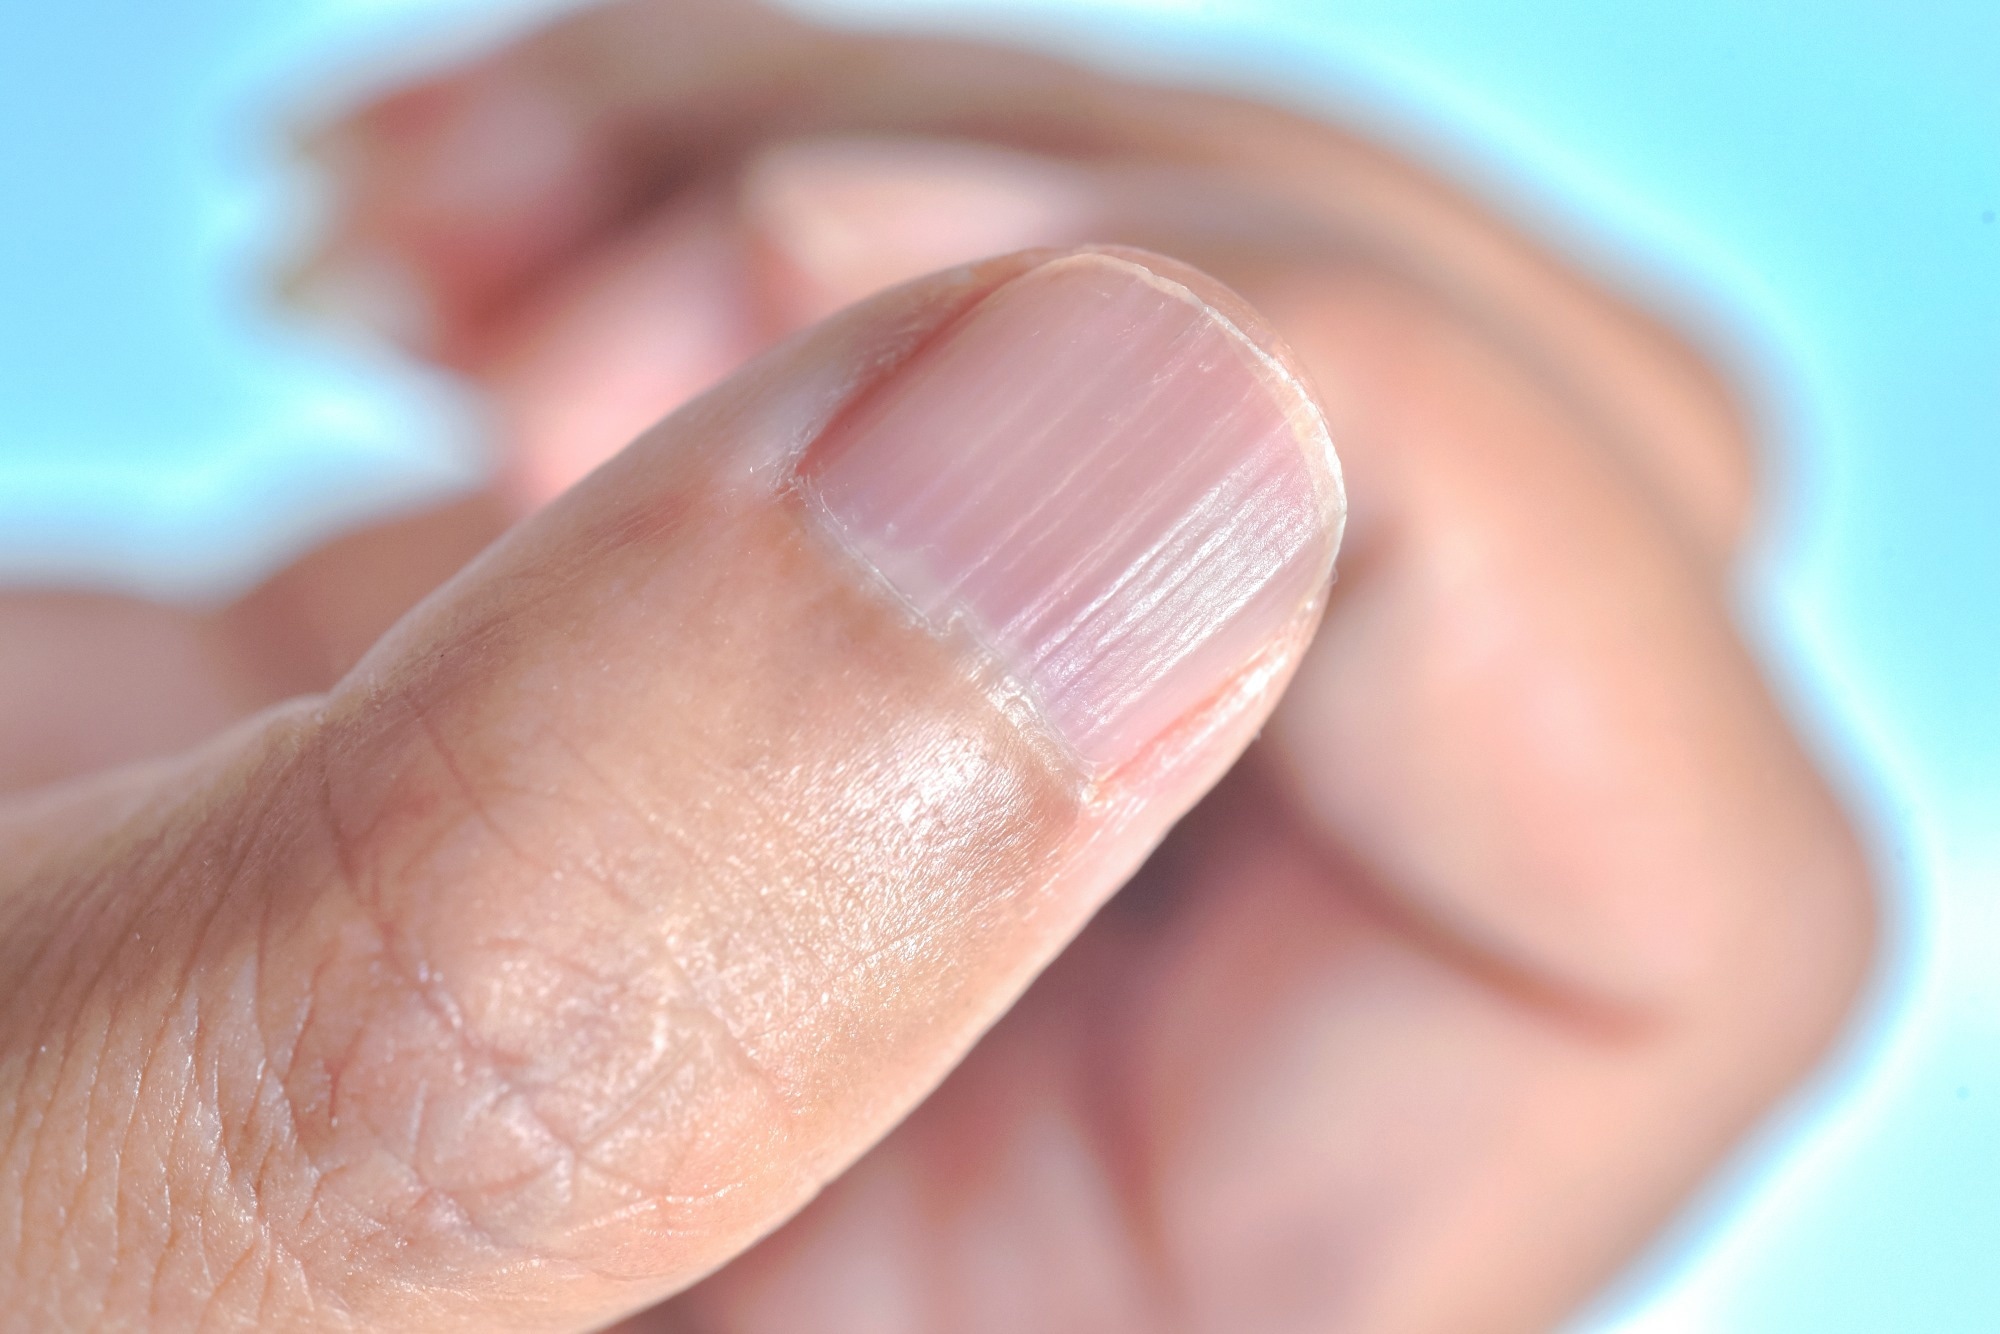 10 facts you didn't know about nails | FingerNails2go